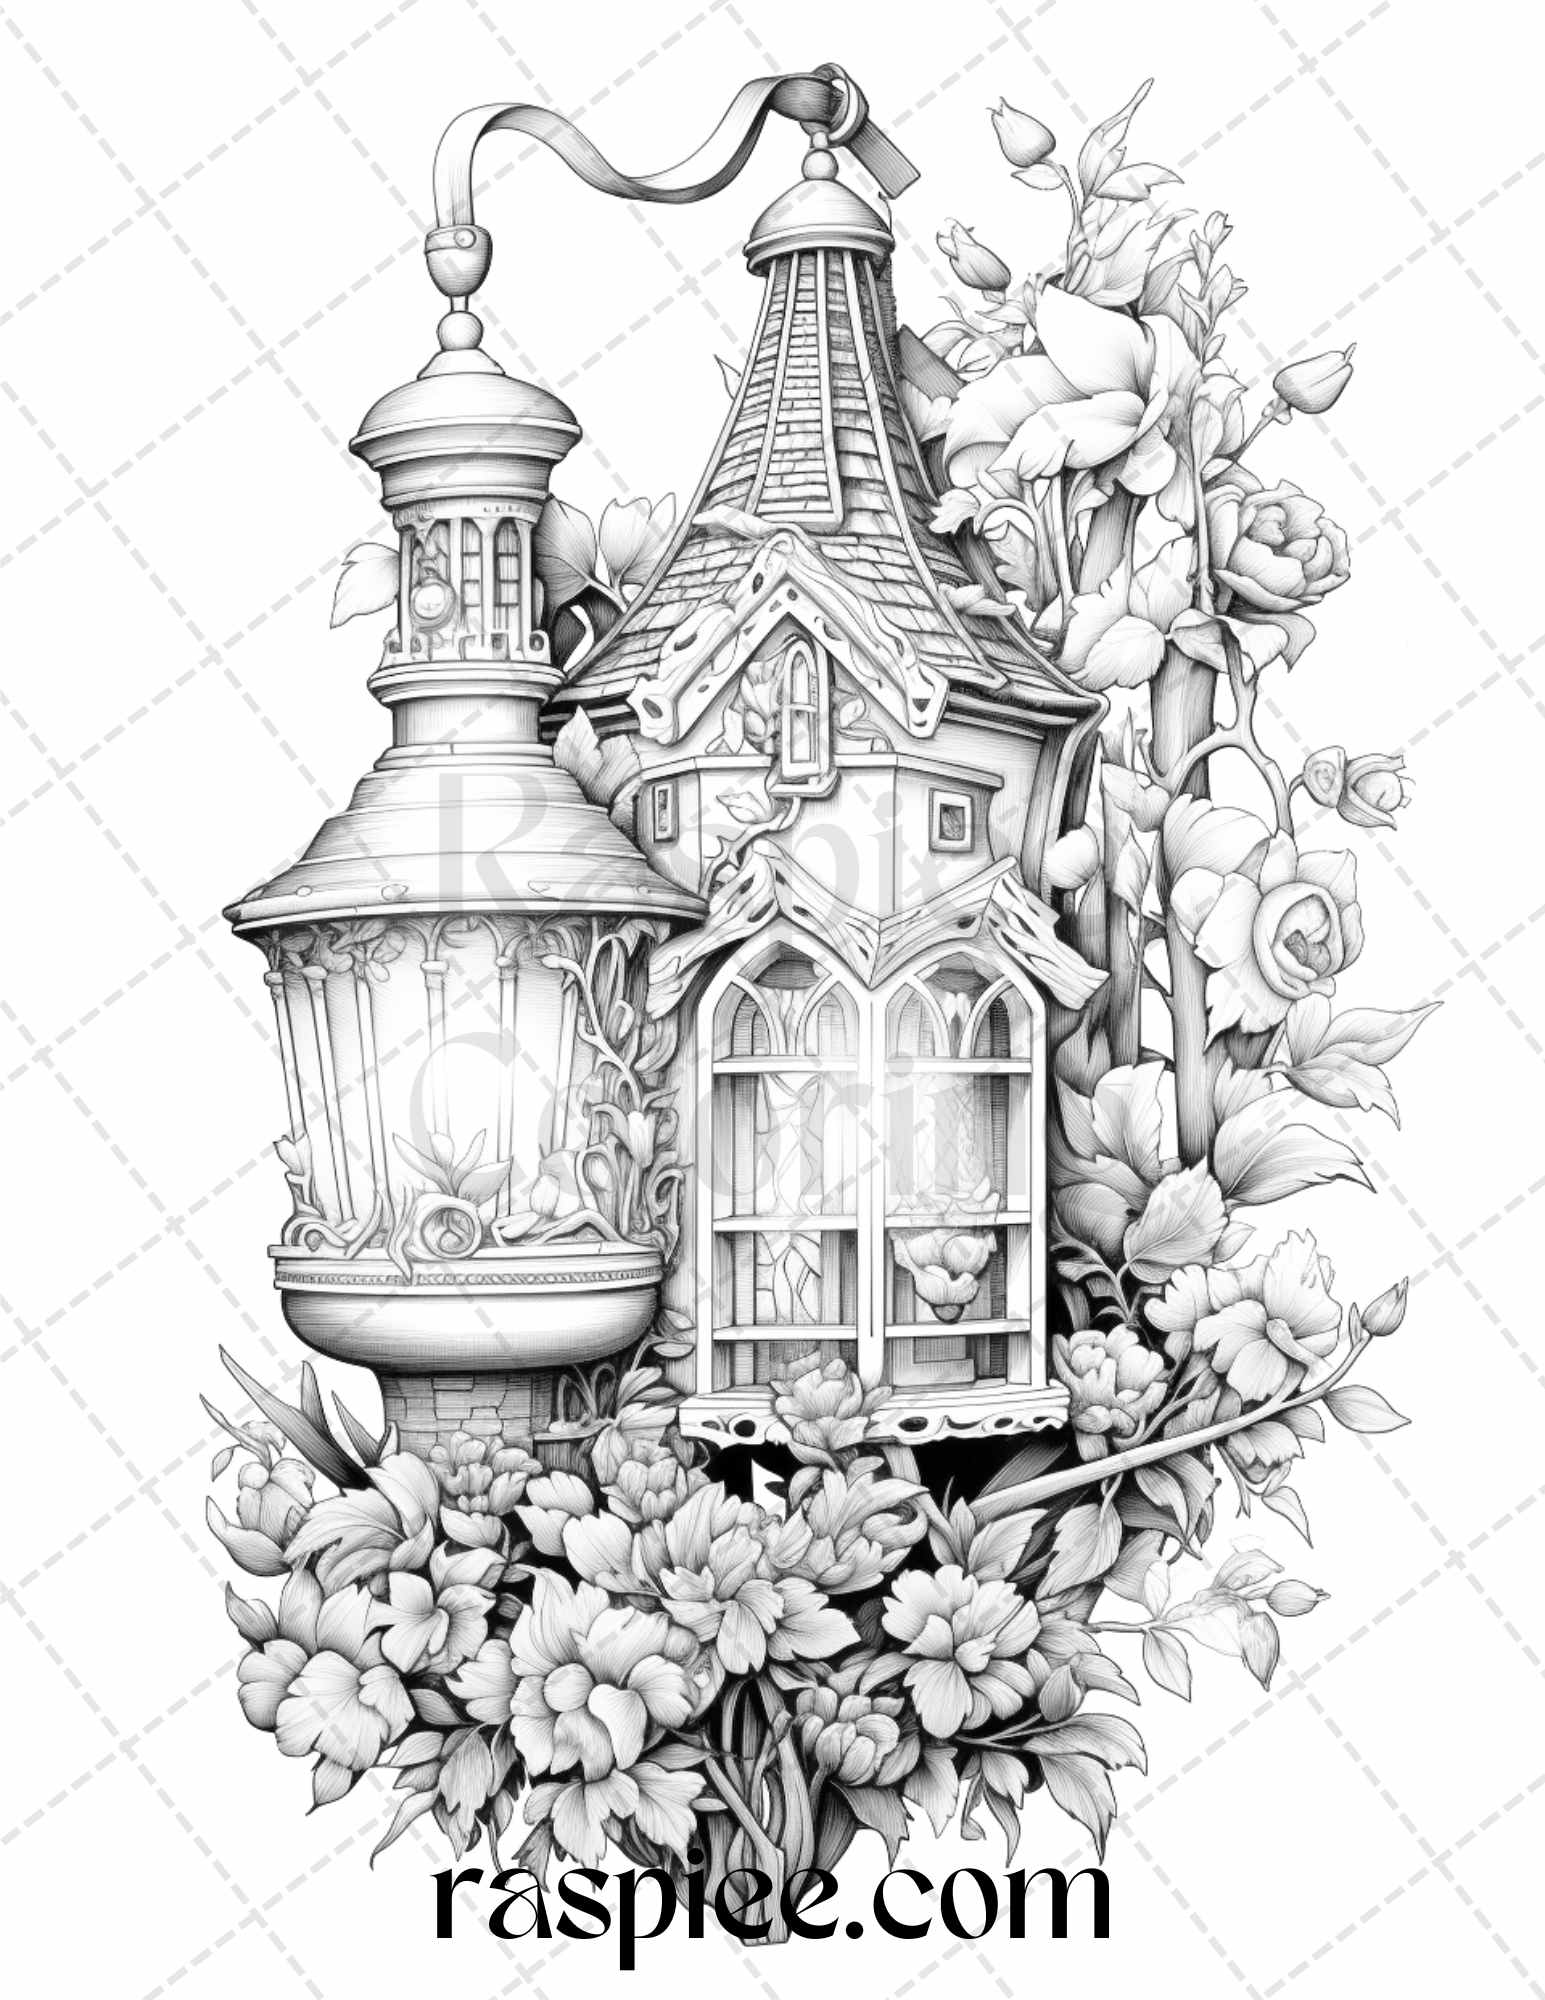 50 Lantern Fairy Houses Grayscale Coloring Pages Printable for Adults, PDF File Instant Download - raspiee